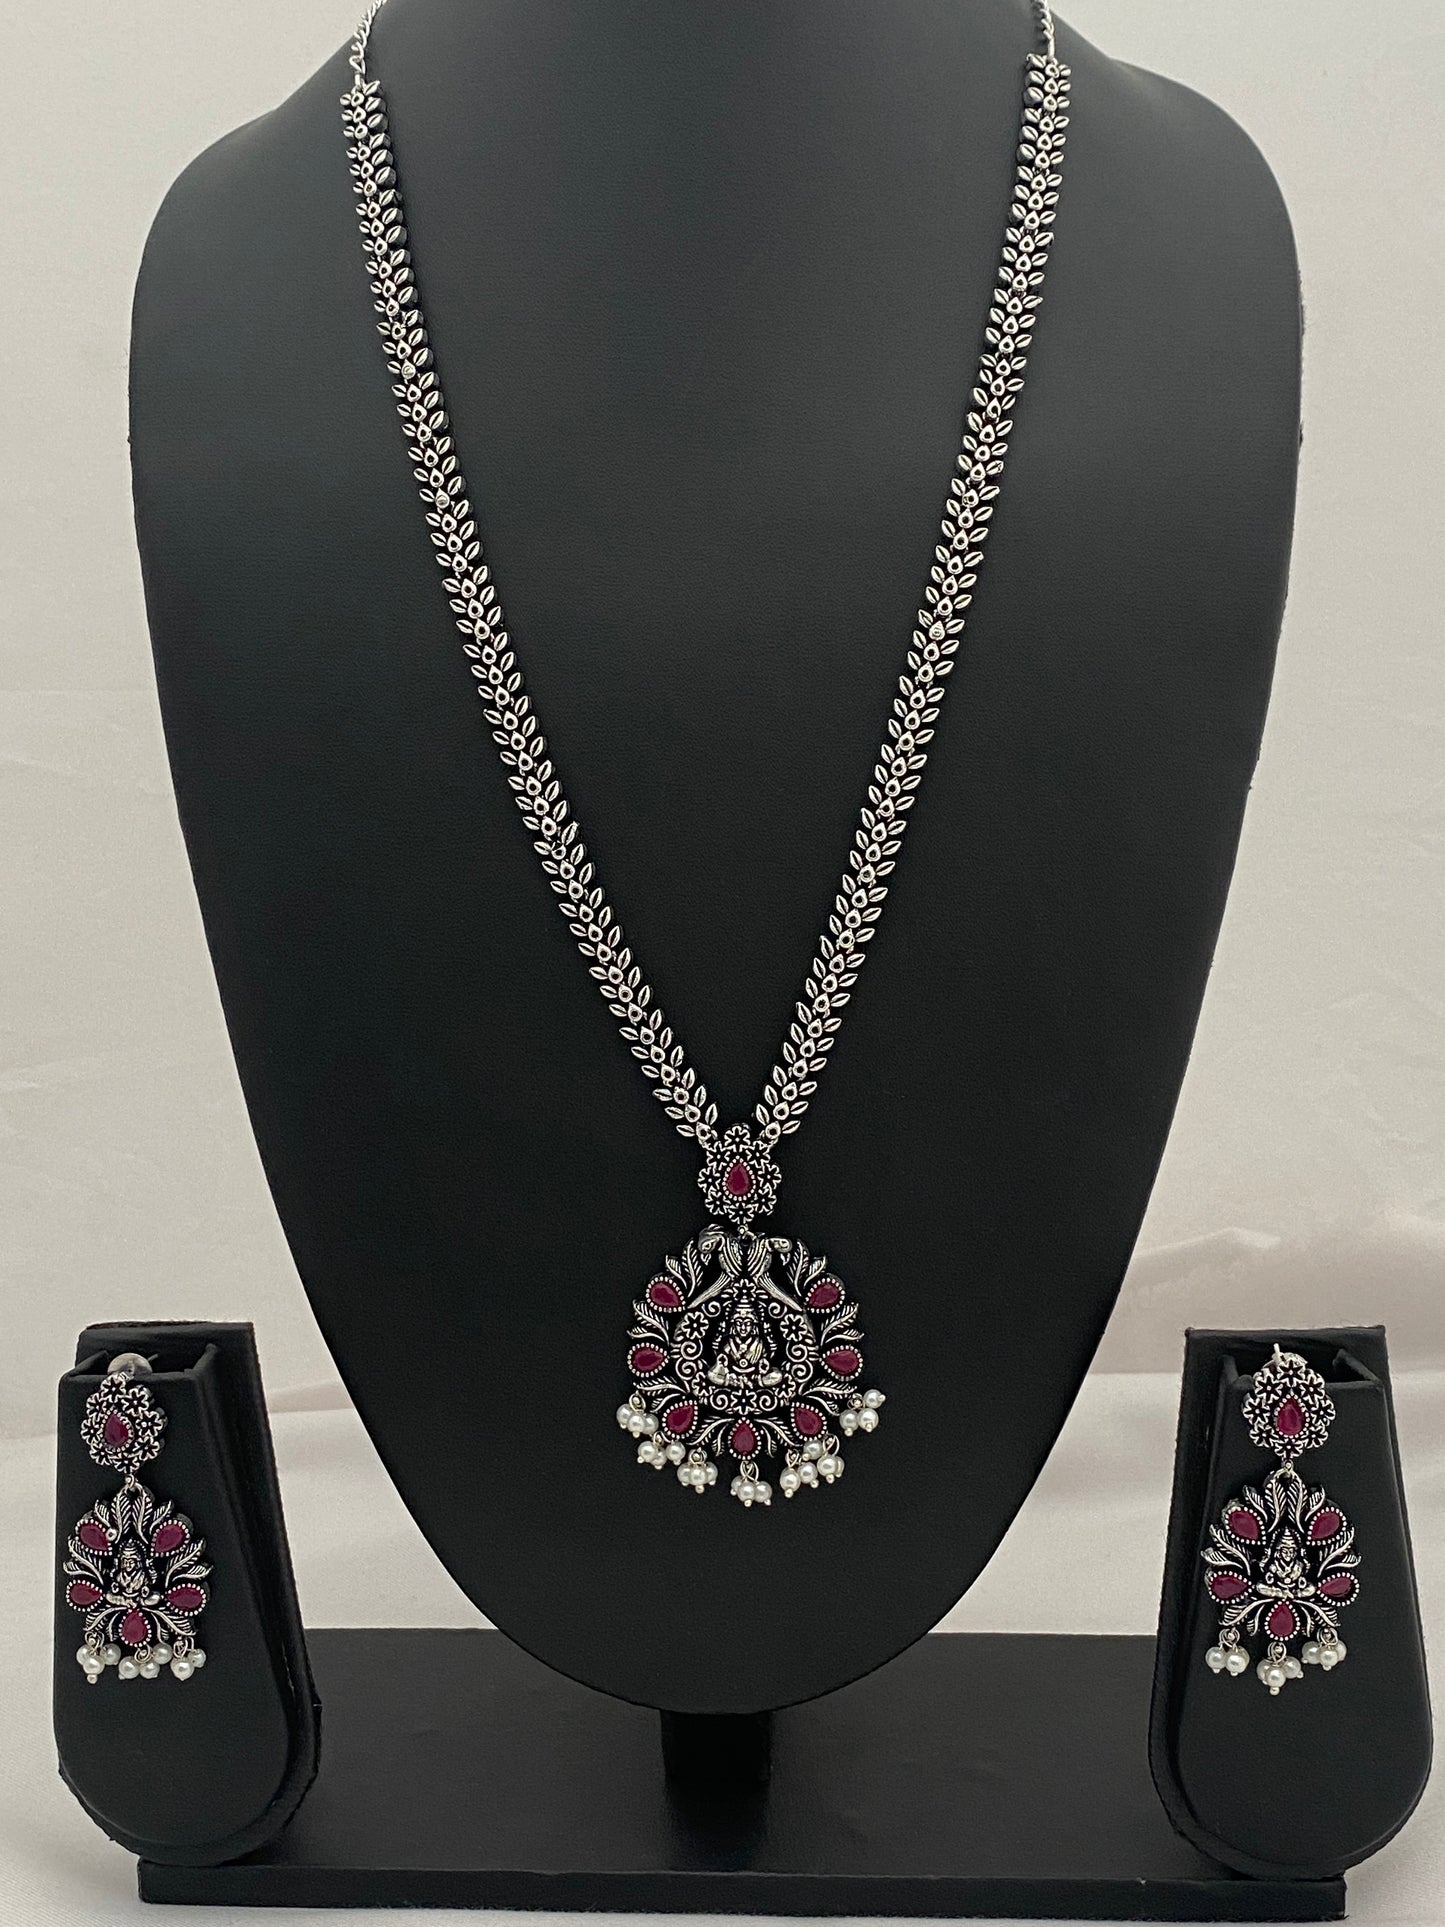 Stunning Oxidized Long Lakshmi Pendant Necklace With Earrings